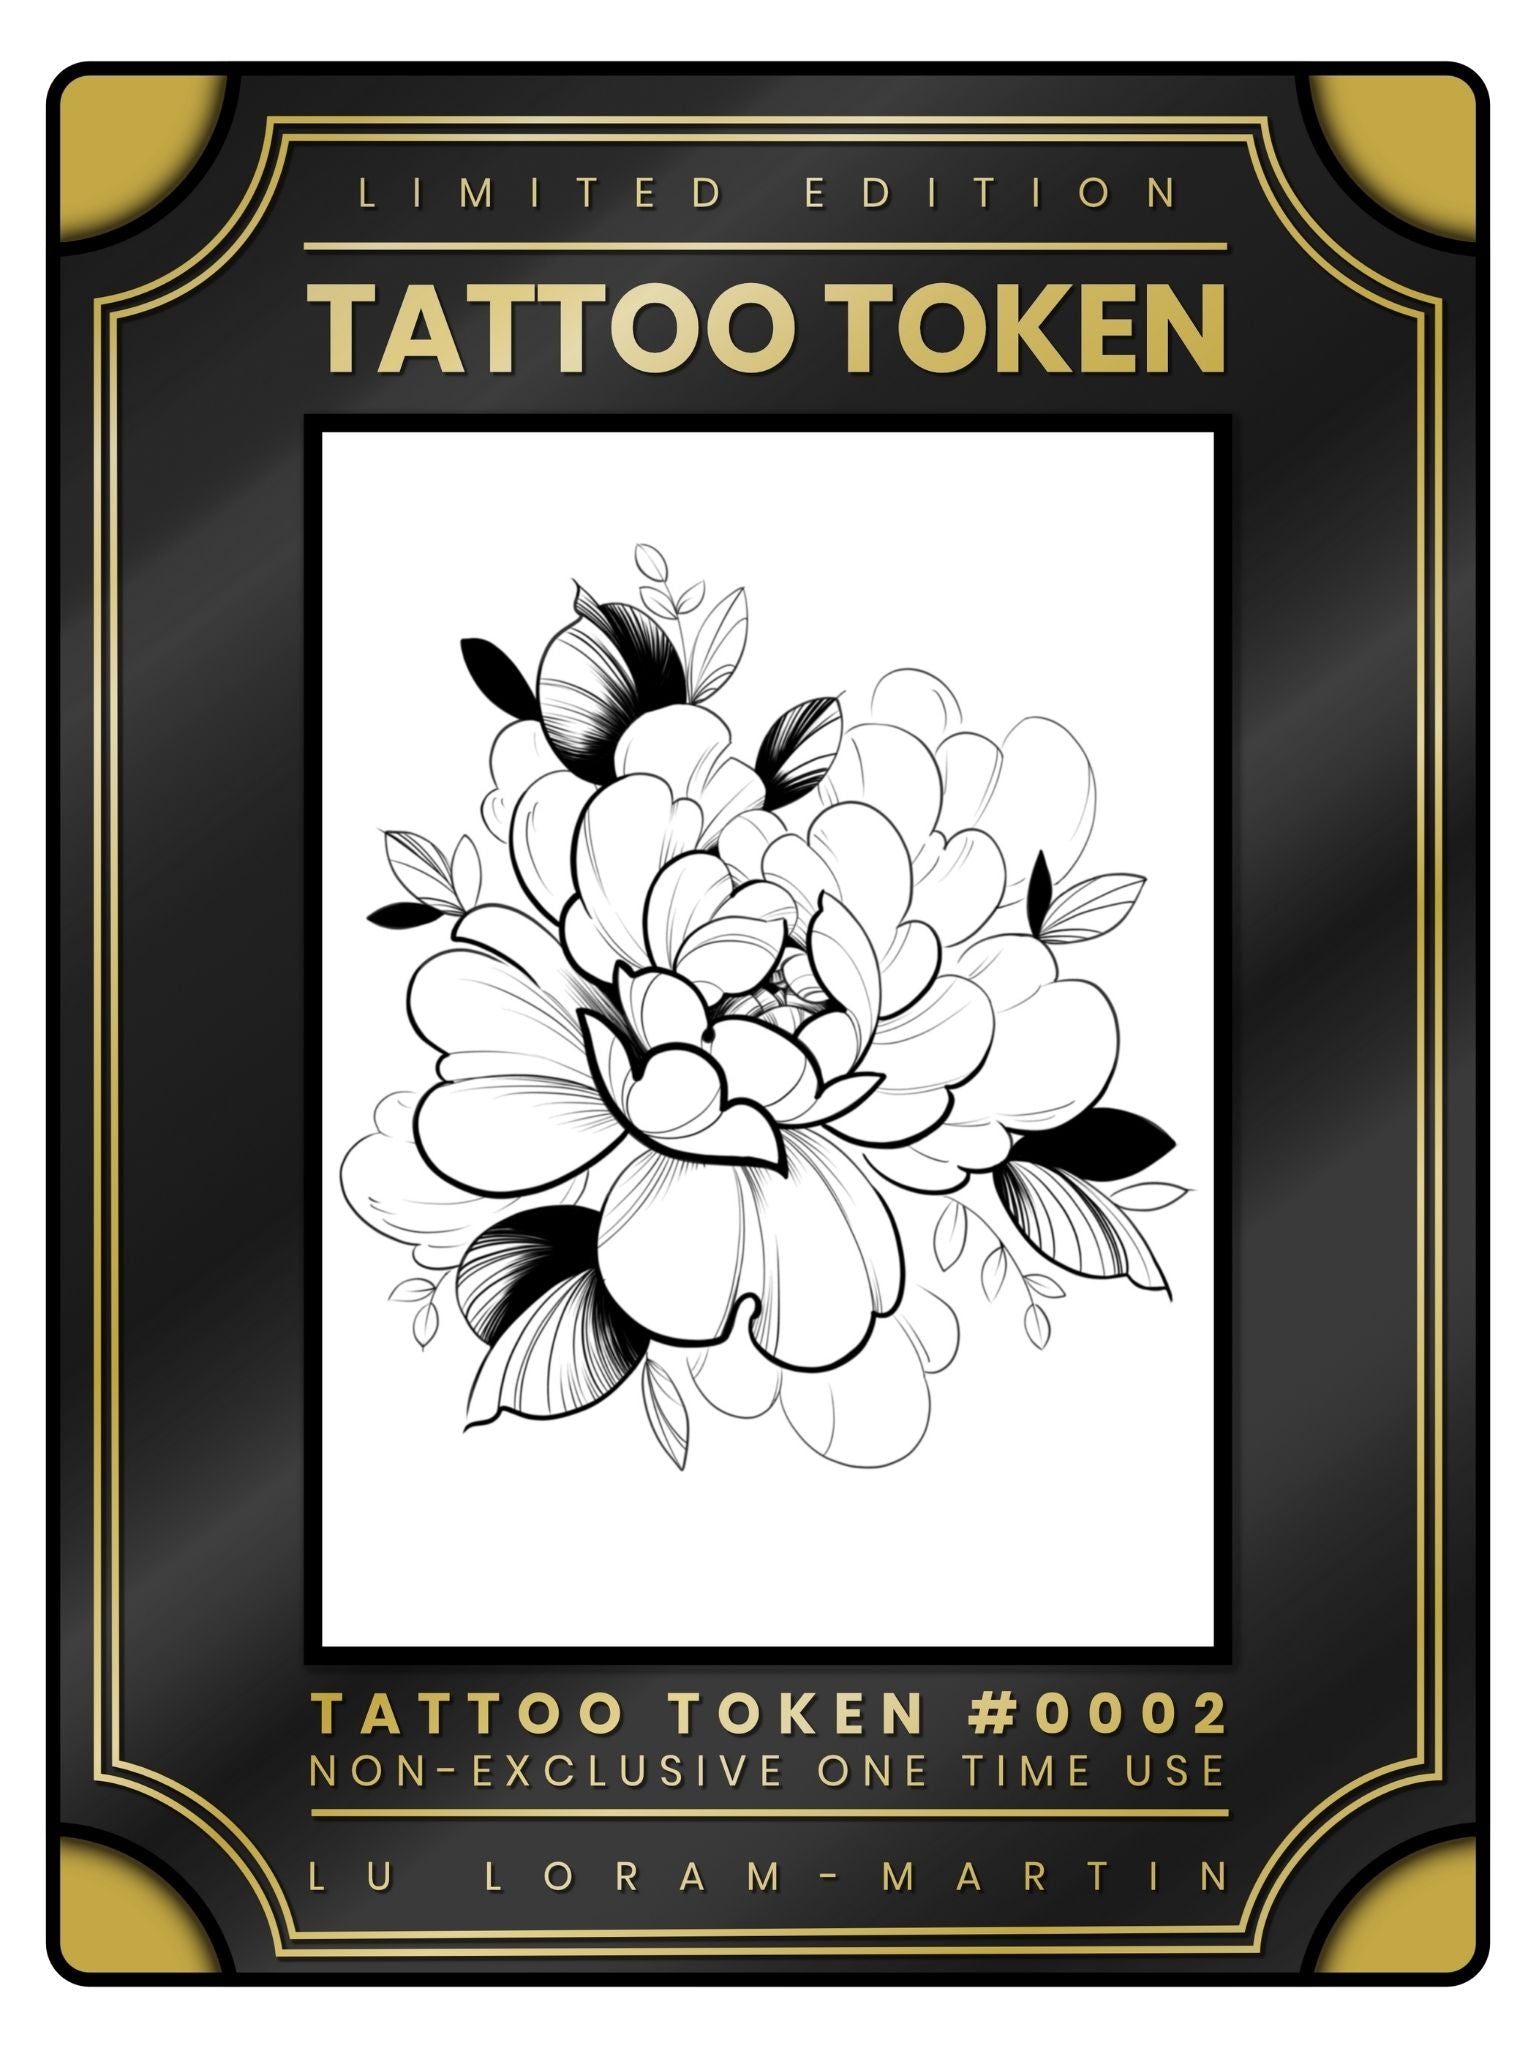 Peony tattoo token design in black line work and shading, illustrated by female floral tattoo artist Lu Loram Martin, Toronto, Canada